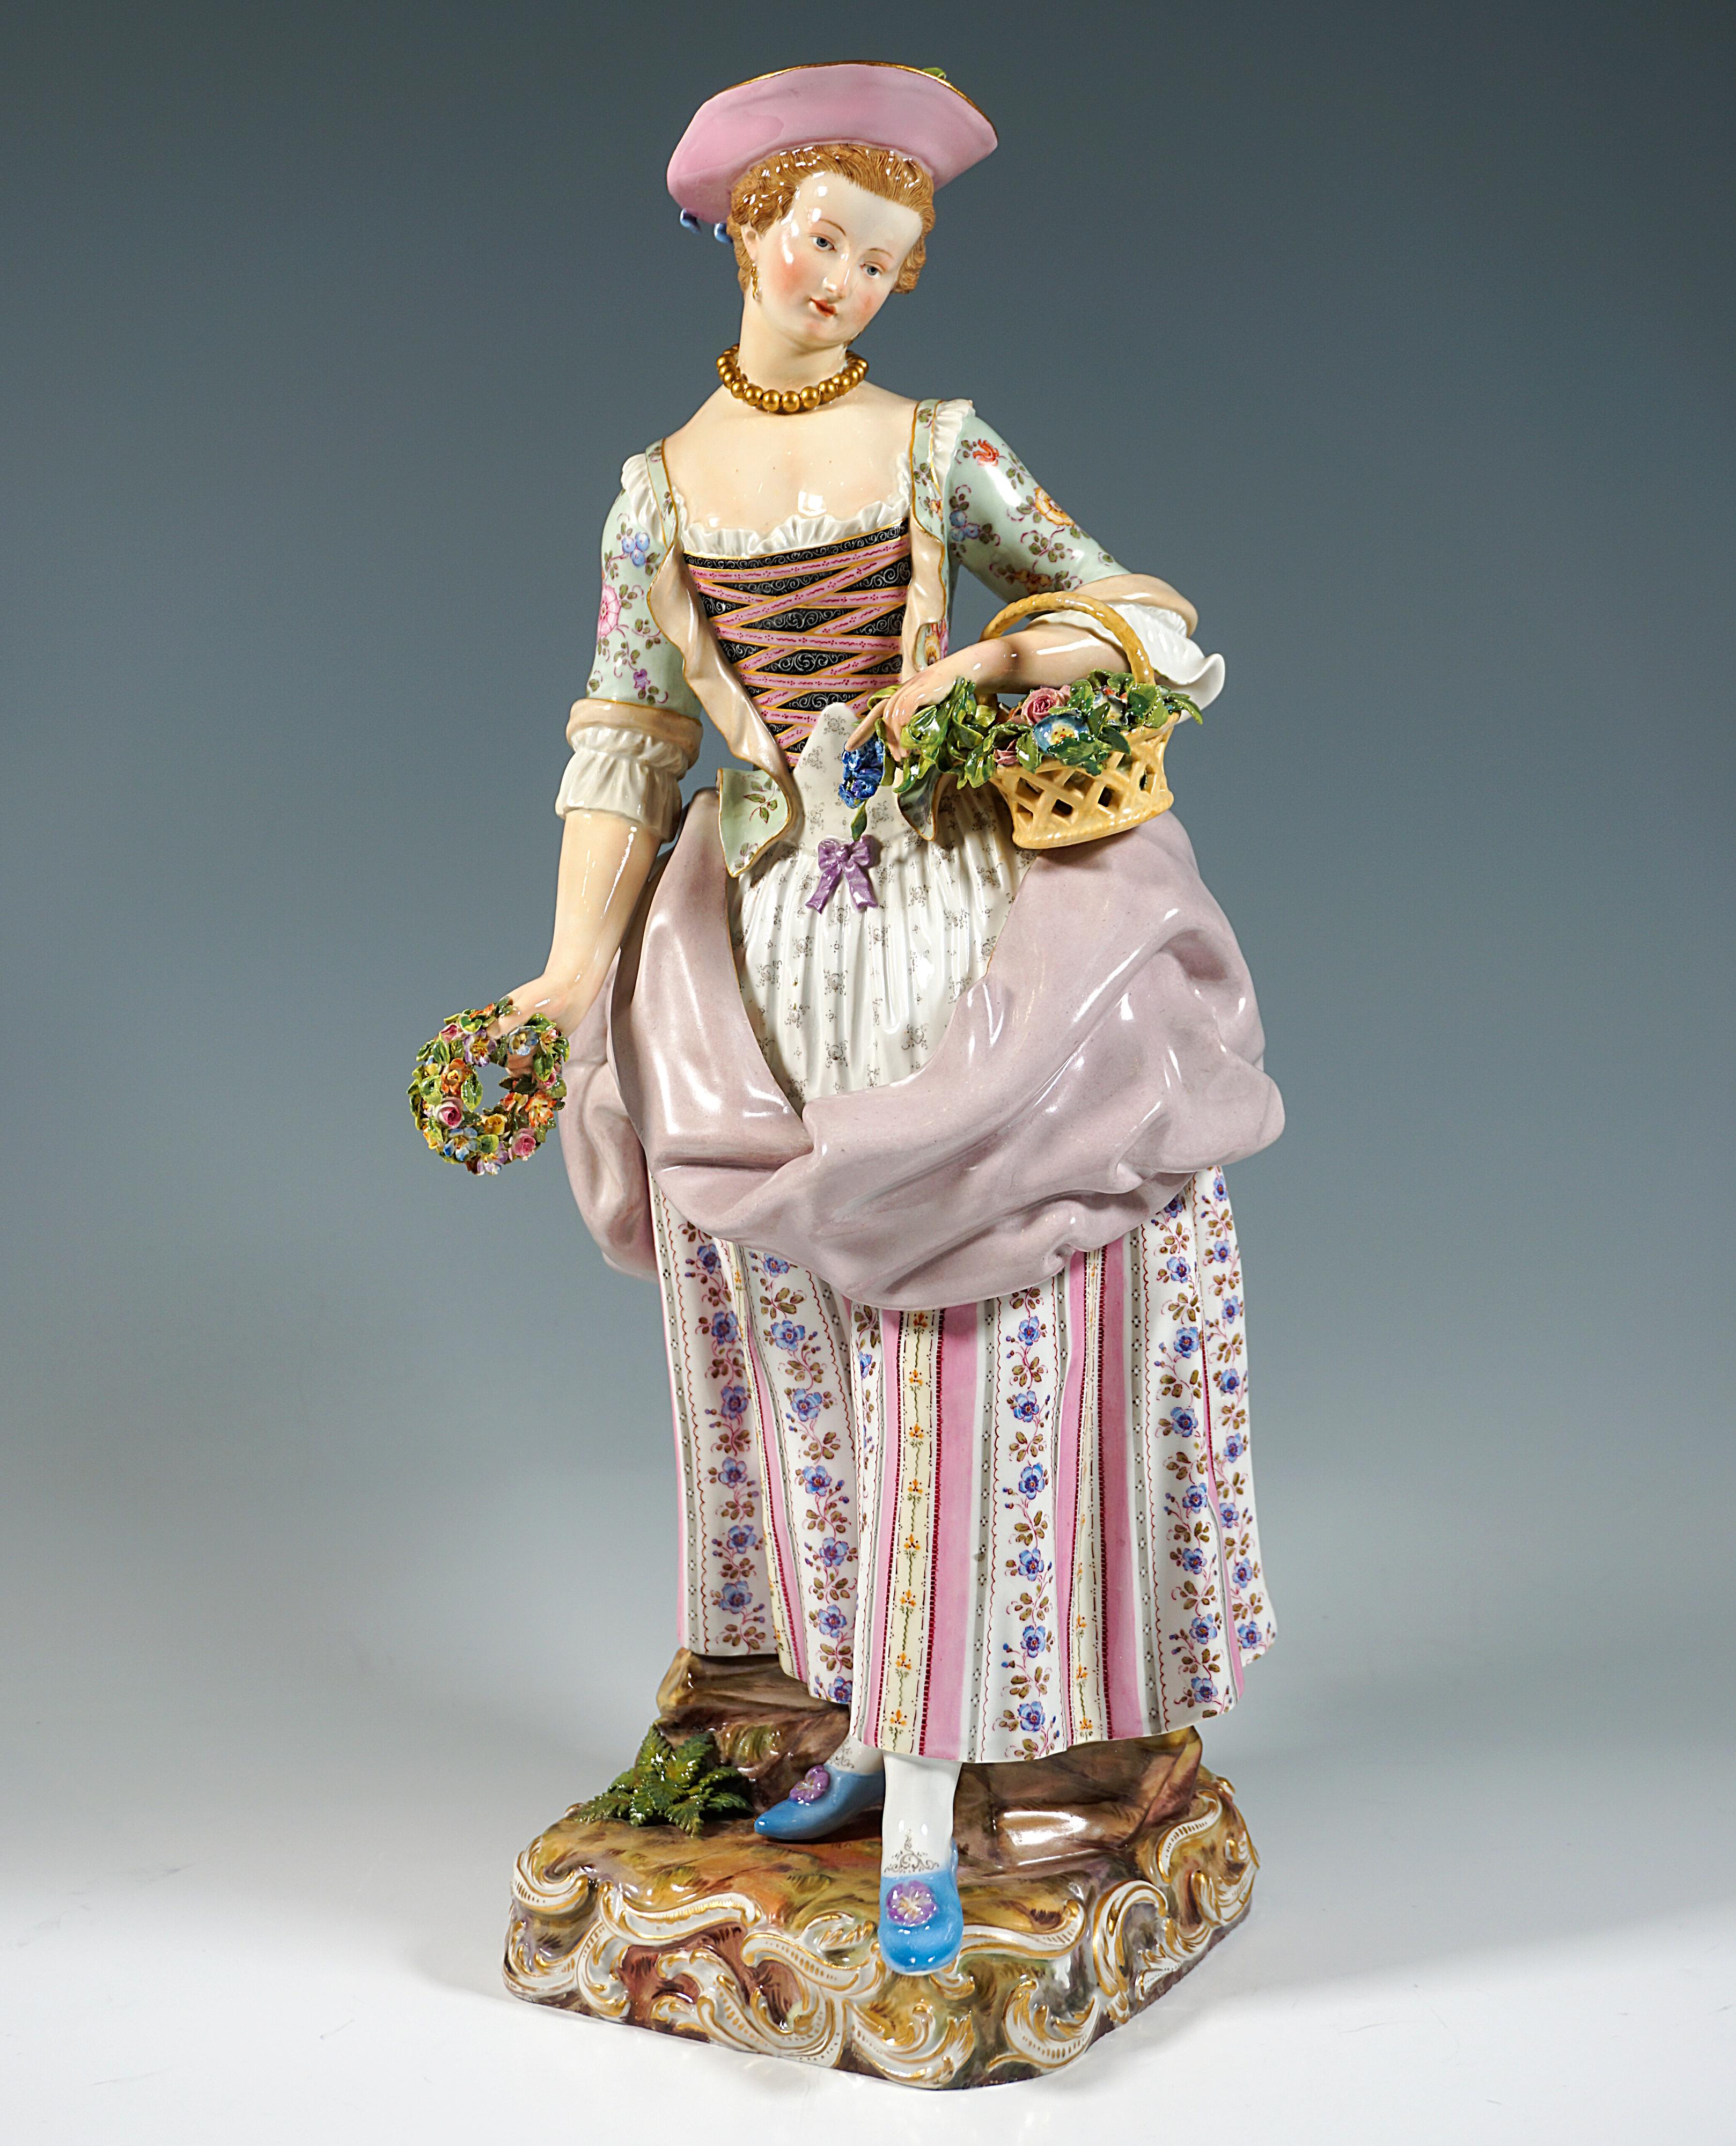 Gardener couple consisting of two individual figures.
The female gardener wears rural rococo clothing: a dress with elaborate floral decoration and pinned-up apron, corset and borders, a brimmed hat with flower arrangement, on the left arm a basket